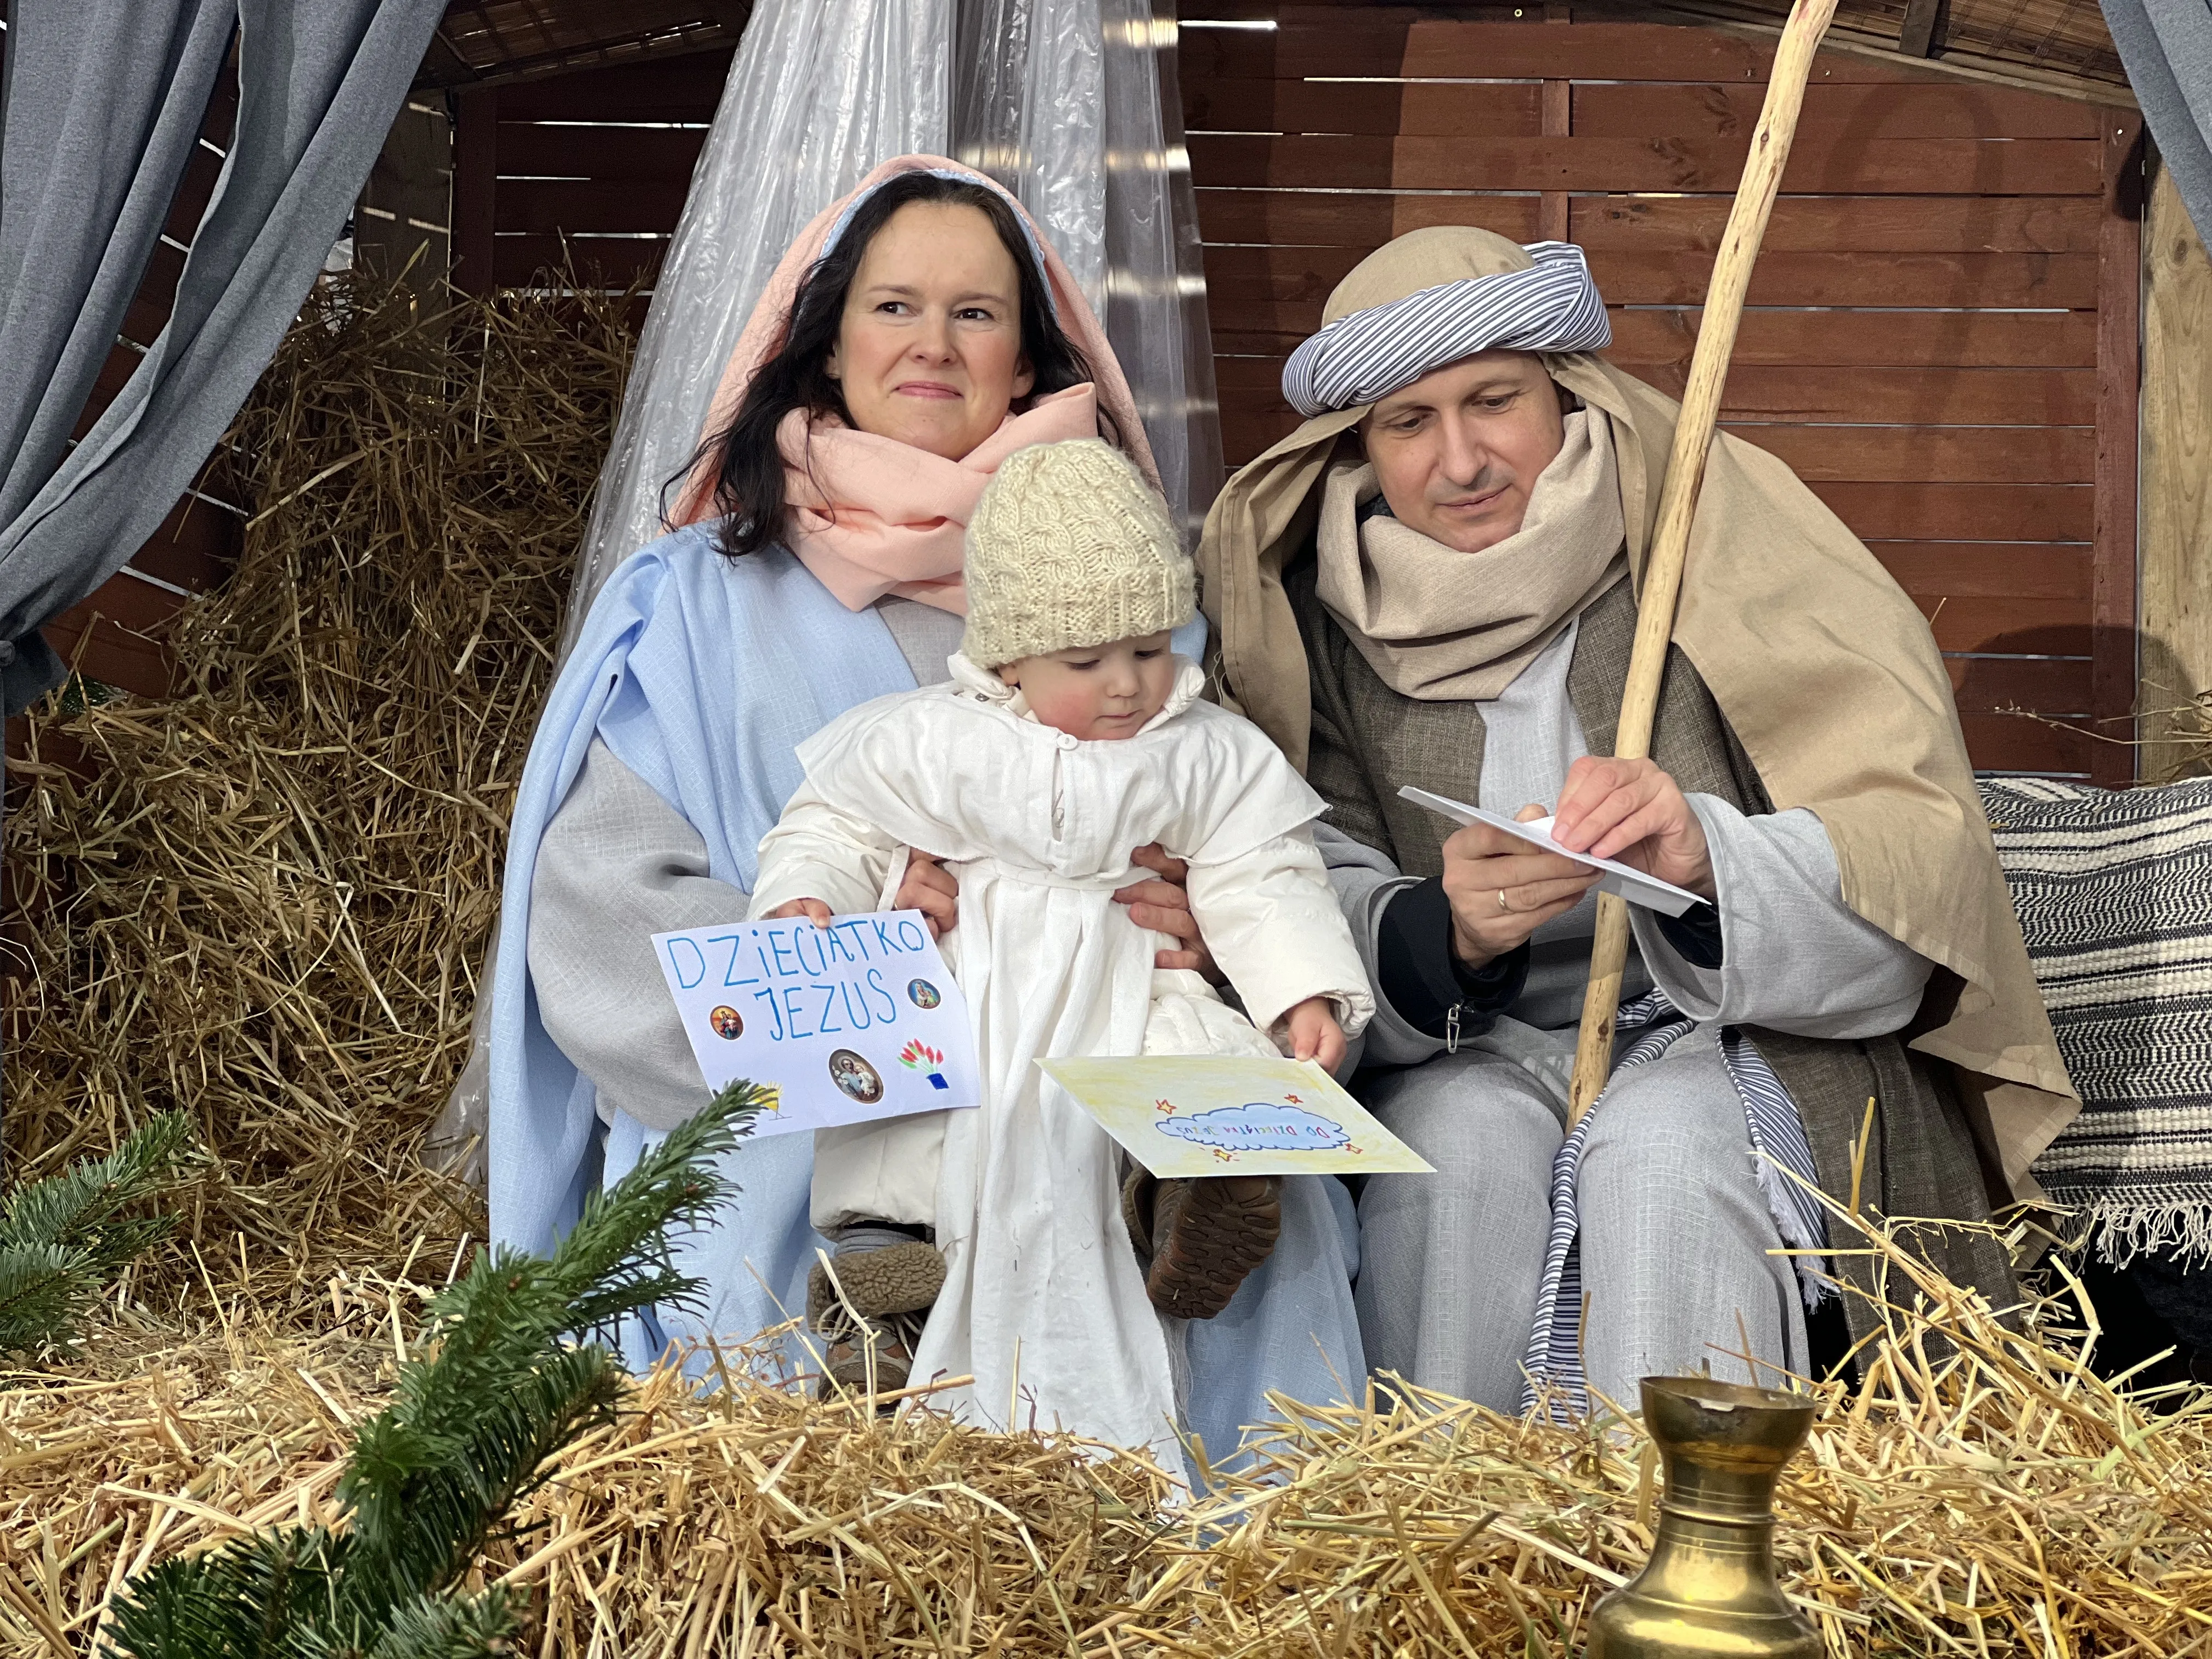 Three Kings parades went down the streets of 800 Polish towns and cities Jan. 6, 2023, for the feast of the Epiphany, with estimates of some 1.5 million people taking part in what is believed to be the largest street Nativity pageant in the world. Justyna Galant/CNA